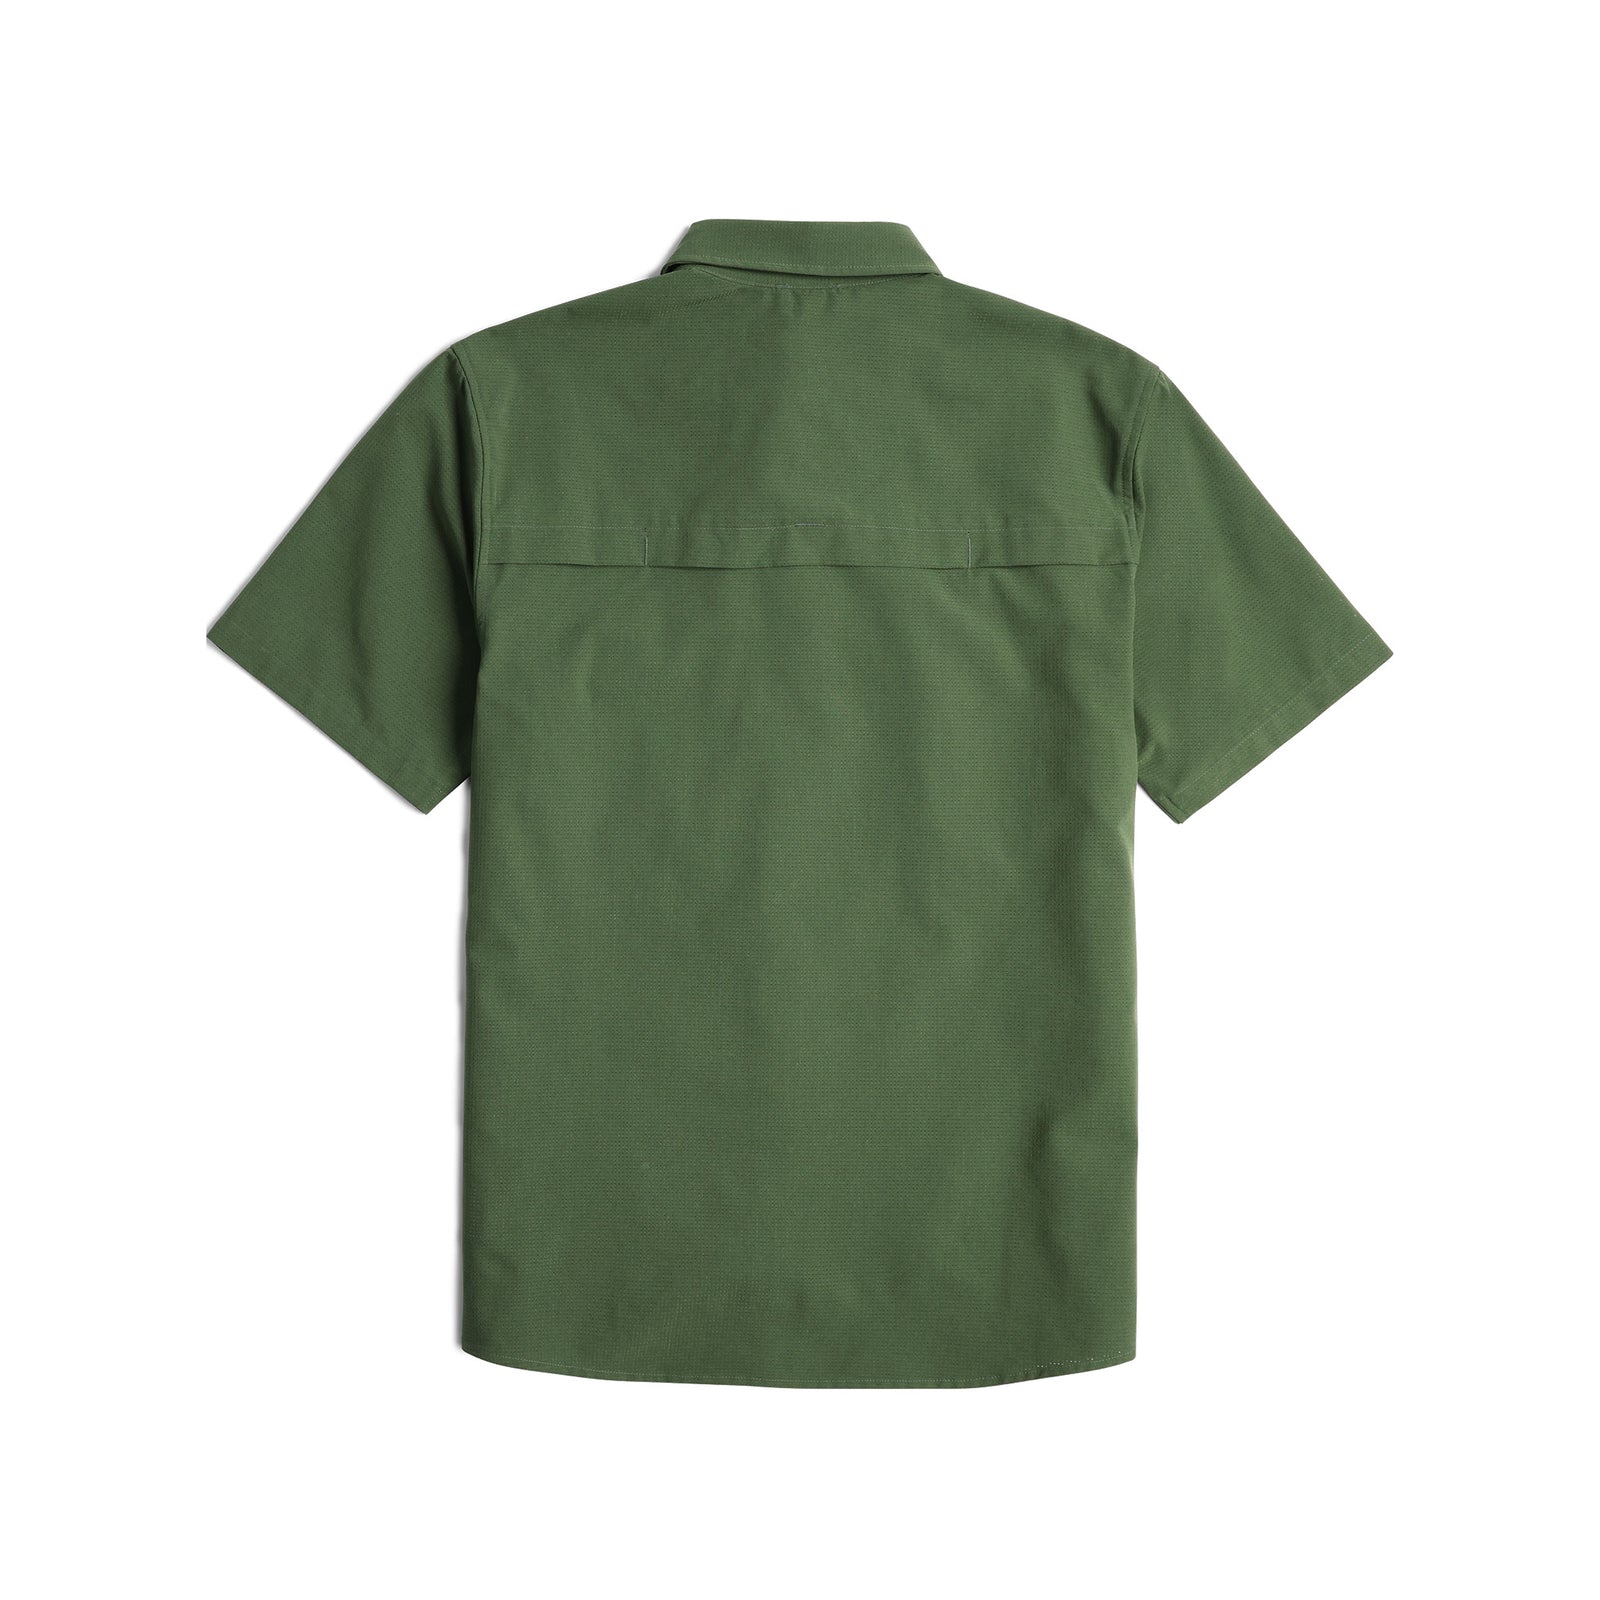 Back View of Topo Designs Retro River Shirt Ss - Men's in "Olive"